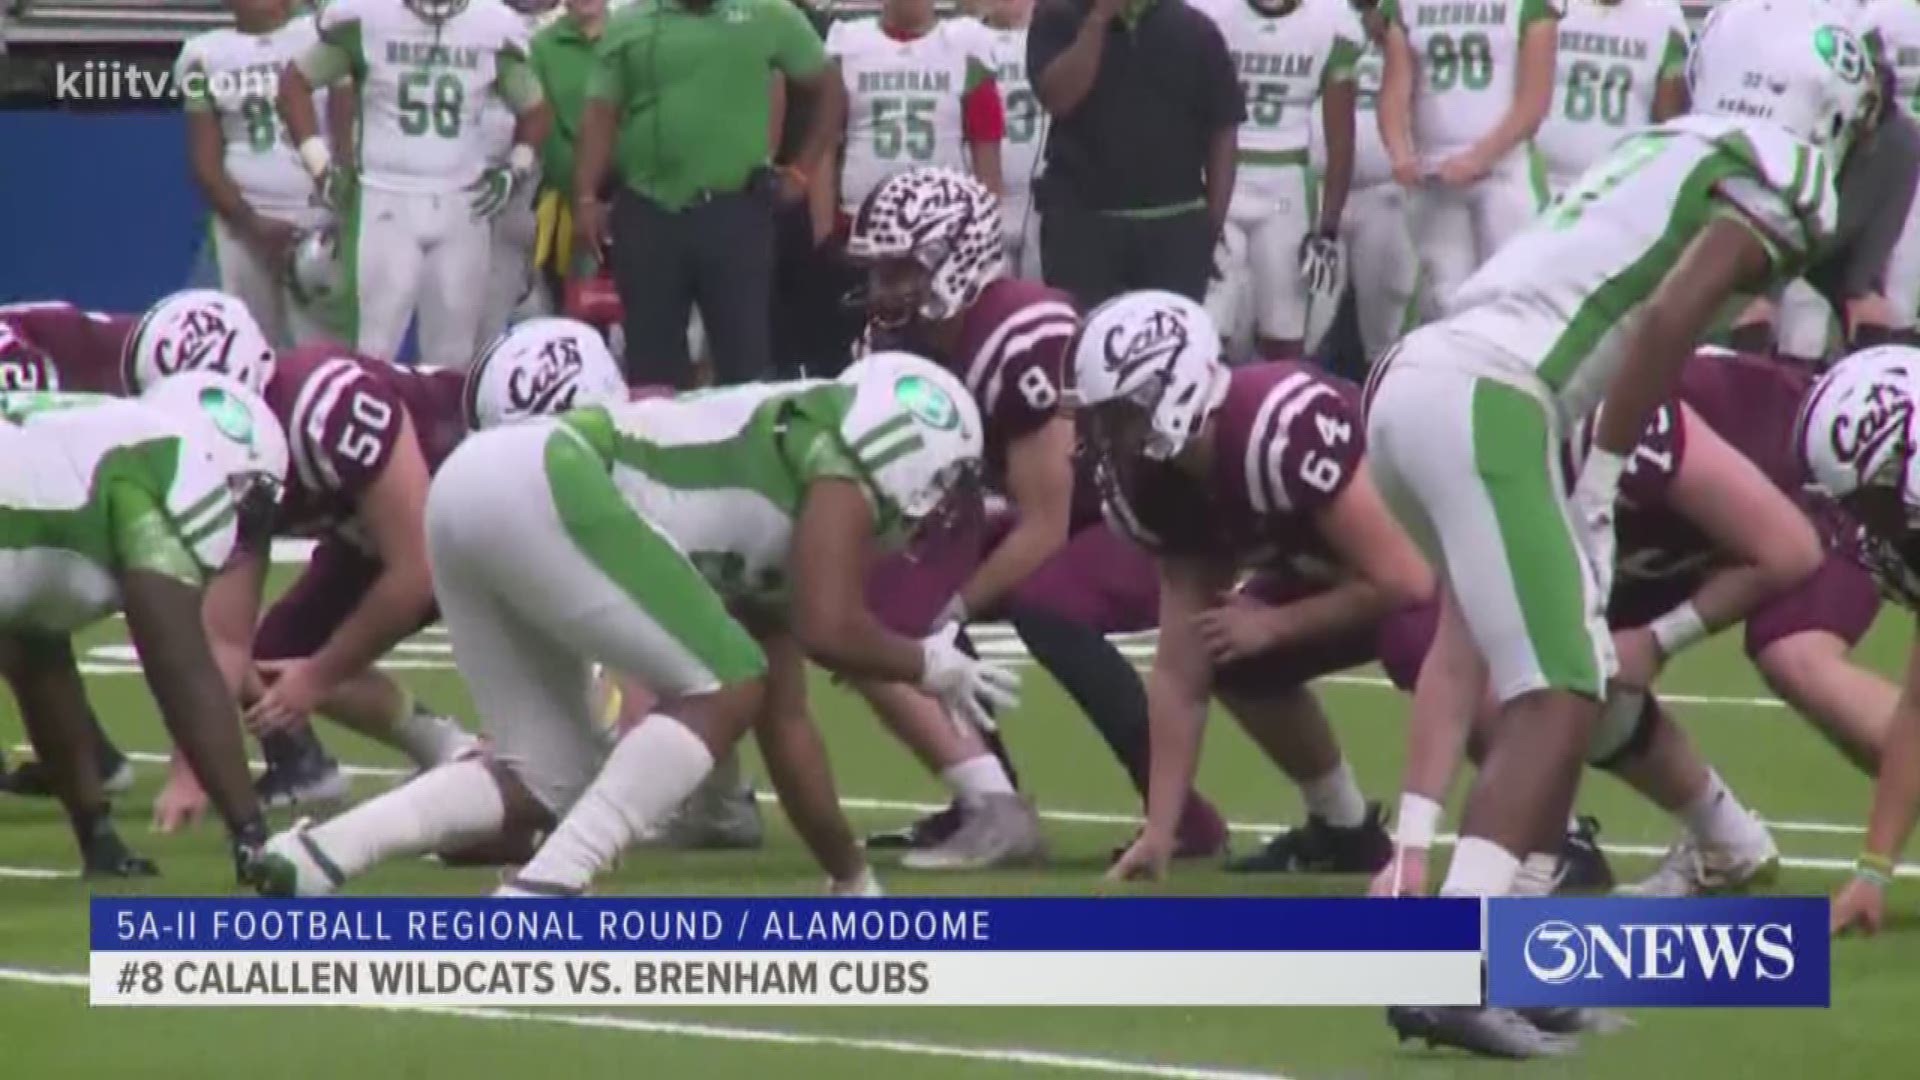 Calallen scored four touchdowns in the final quarter including two from Jeremiah Earls as the Cats beat Brenham 47-32 to advance to face Boerne Champion.